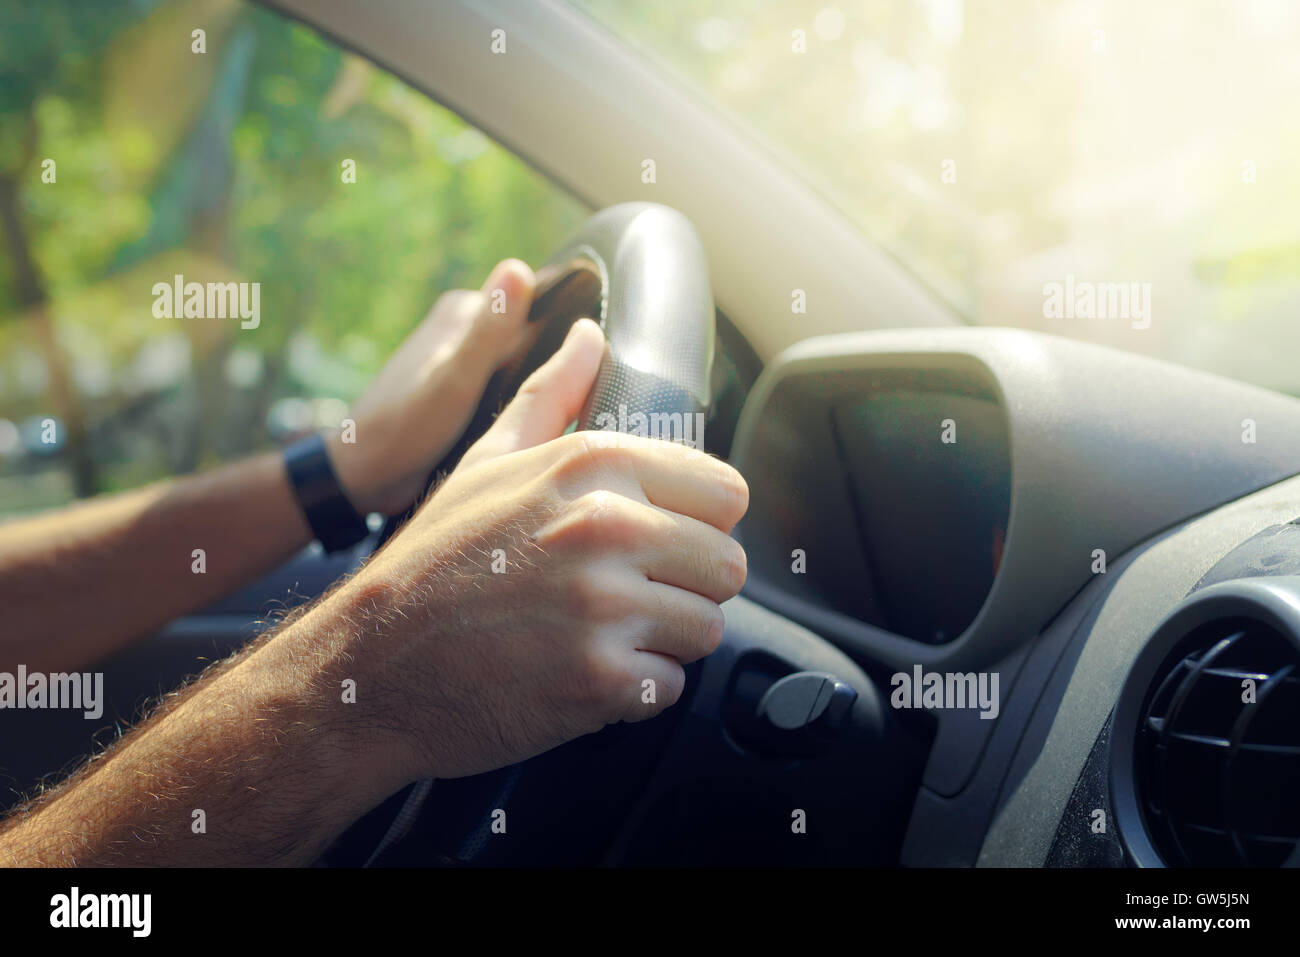 Male hands holding car steering wheel the right way for safe driving Stock Photo